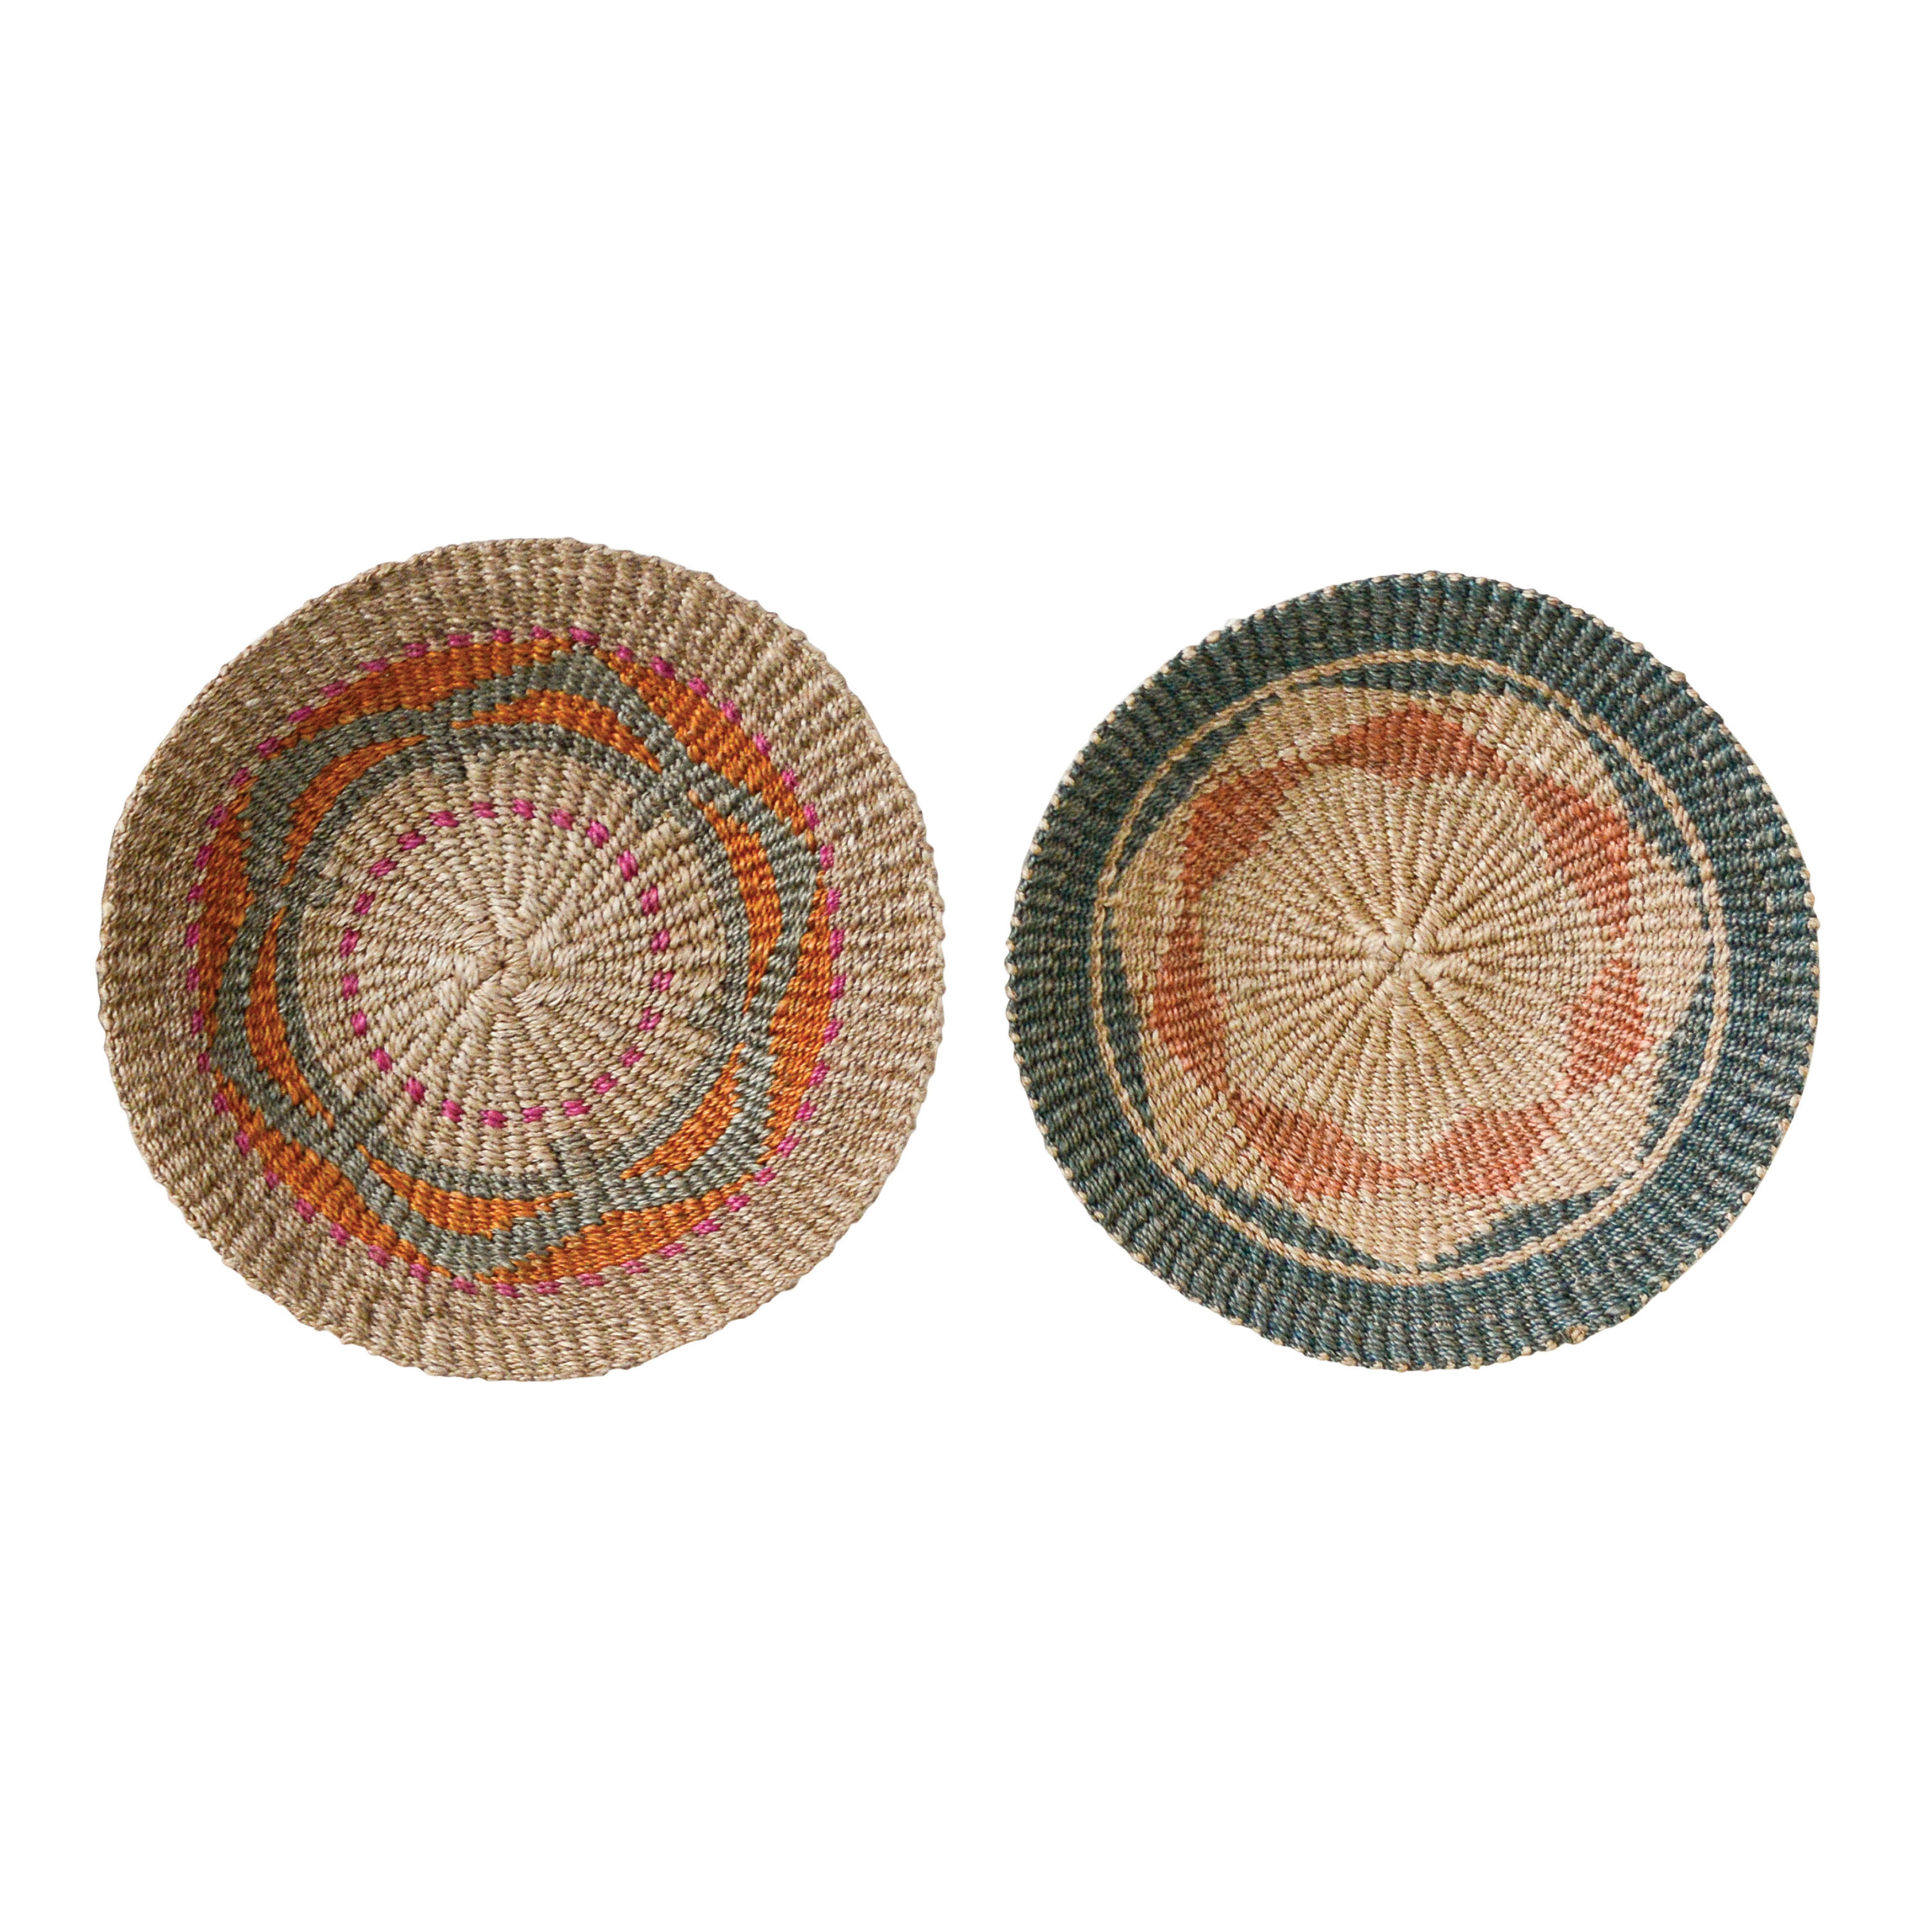 Handwoven Abaca Wall Baskets (Set of 2 Styles) - Image 0